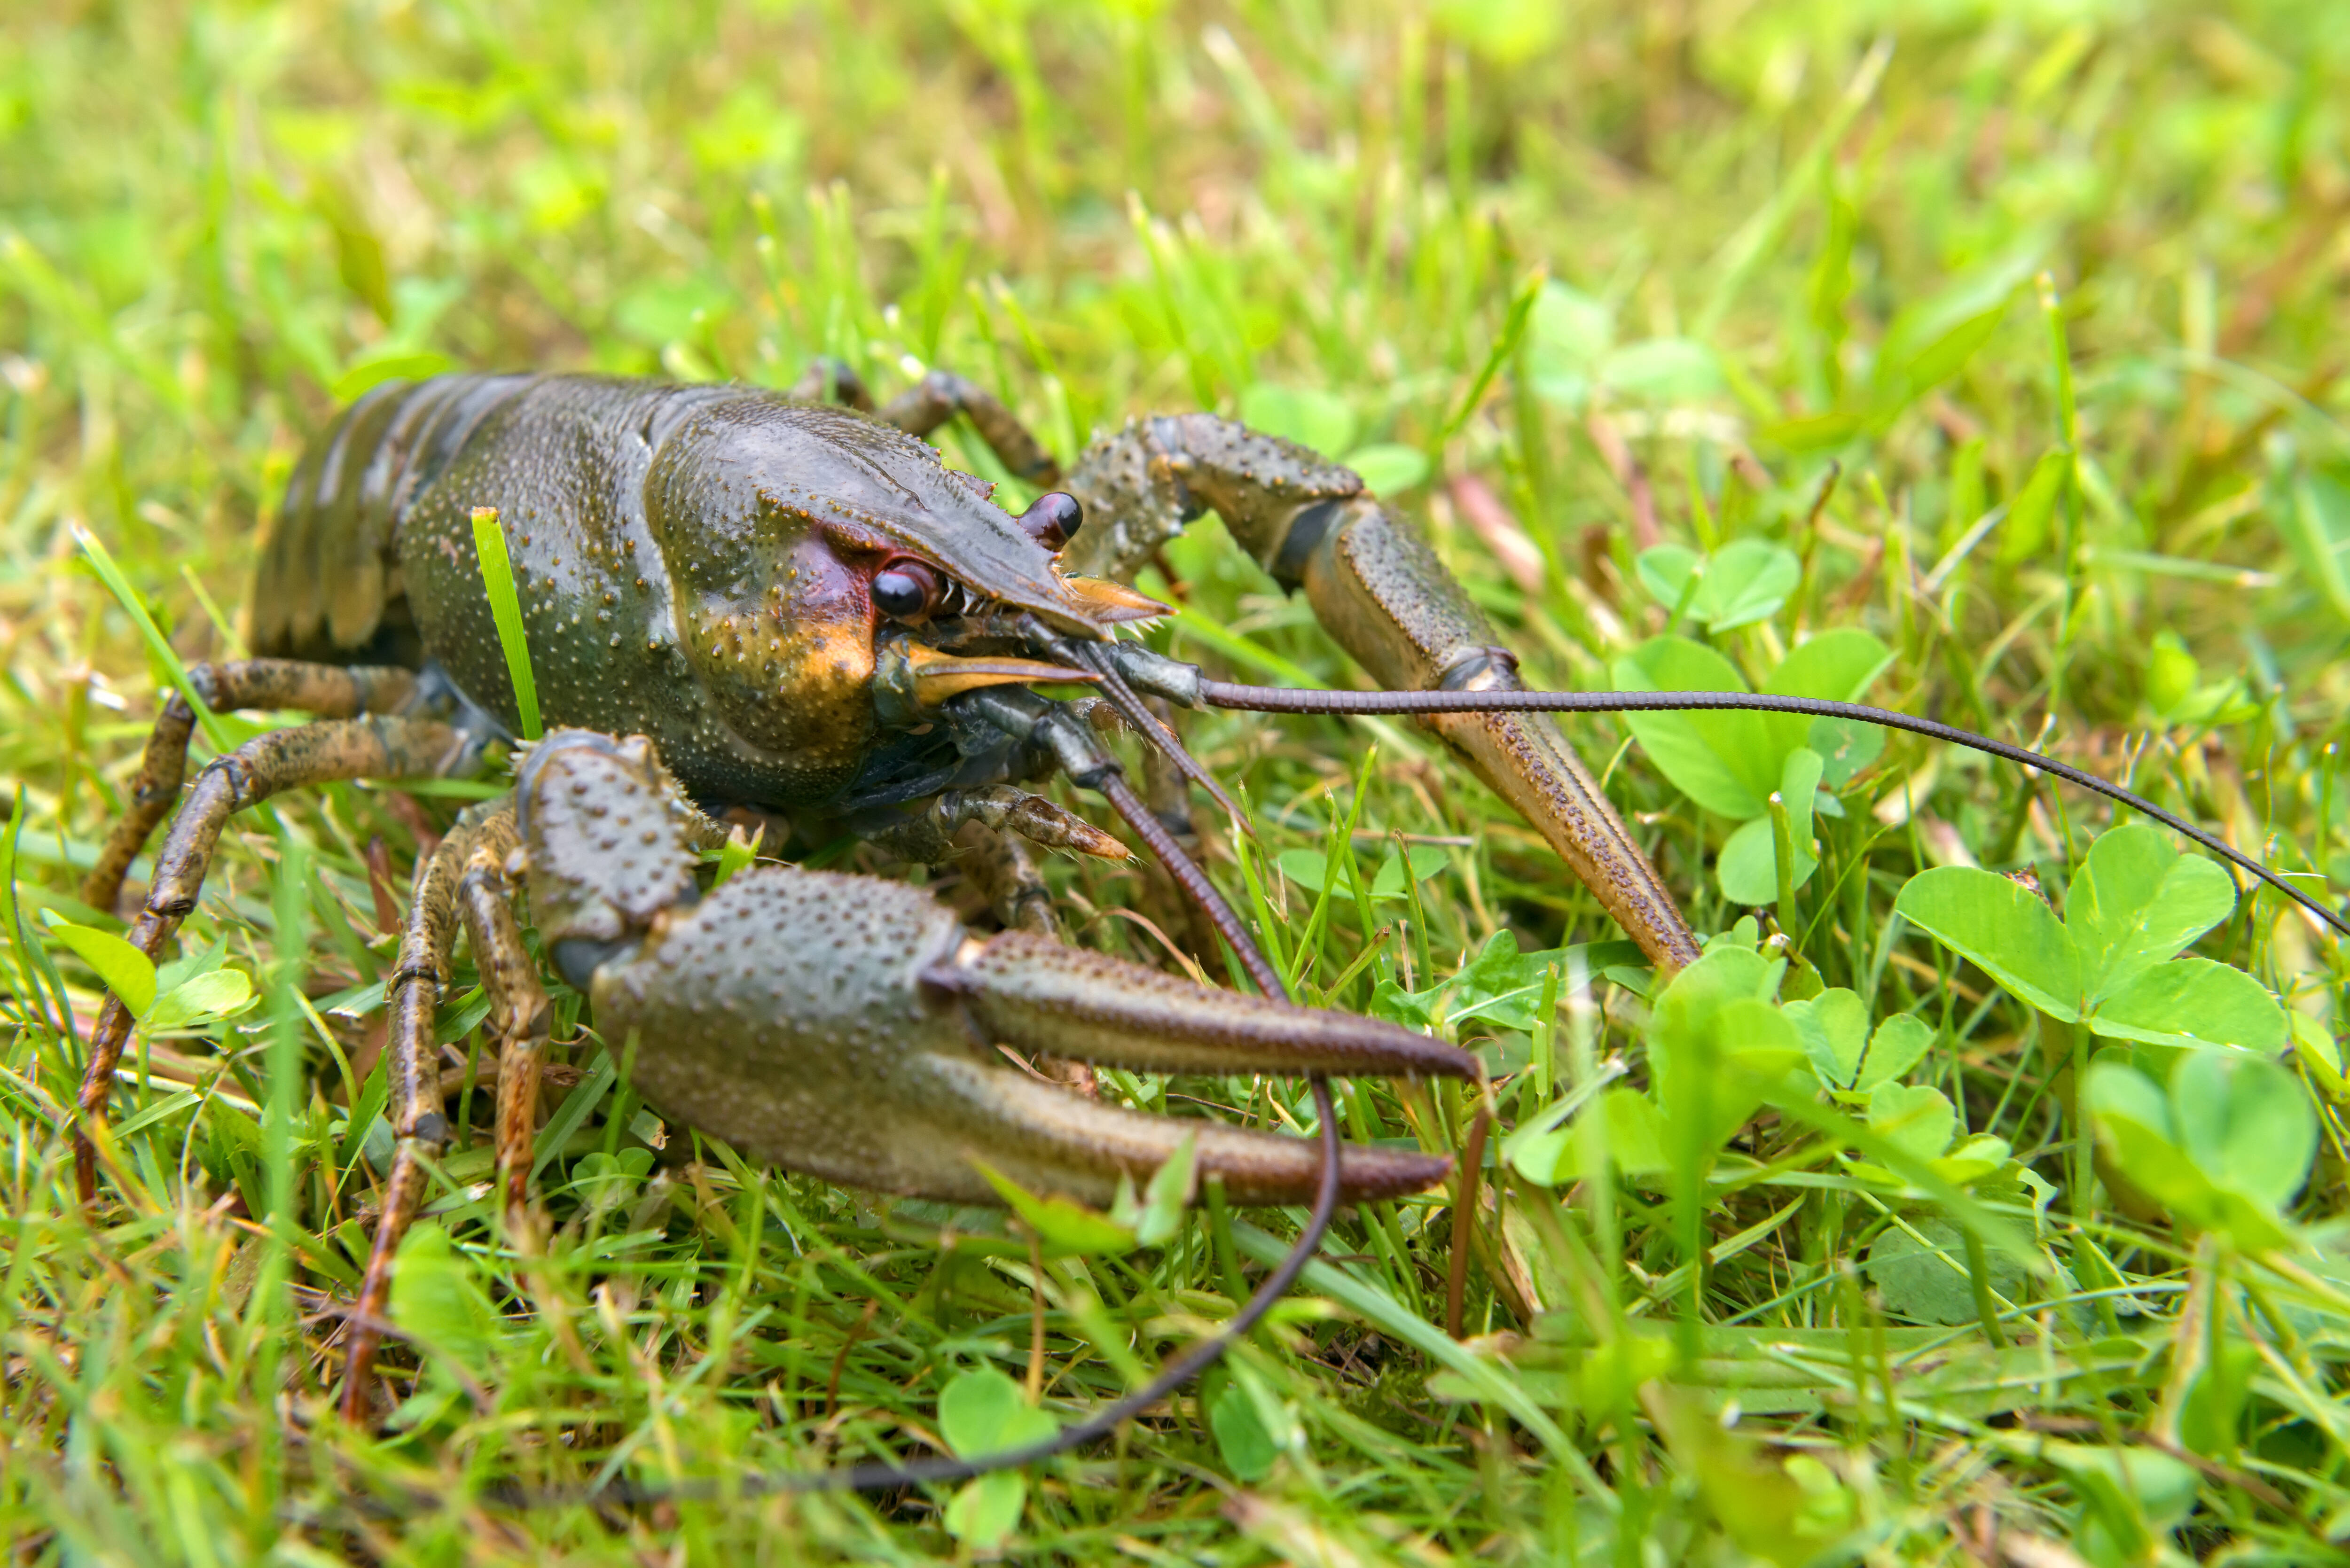 Study finds crayfish treated with antidepressants become more outgoing, adventurous